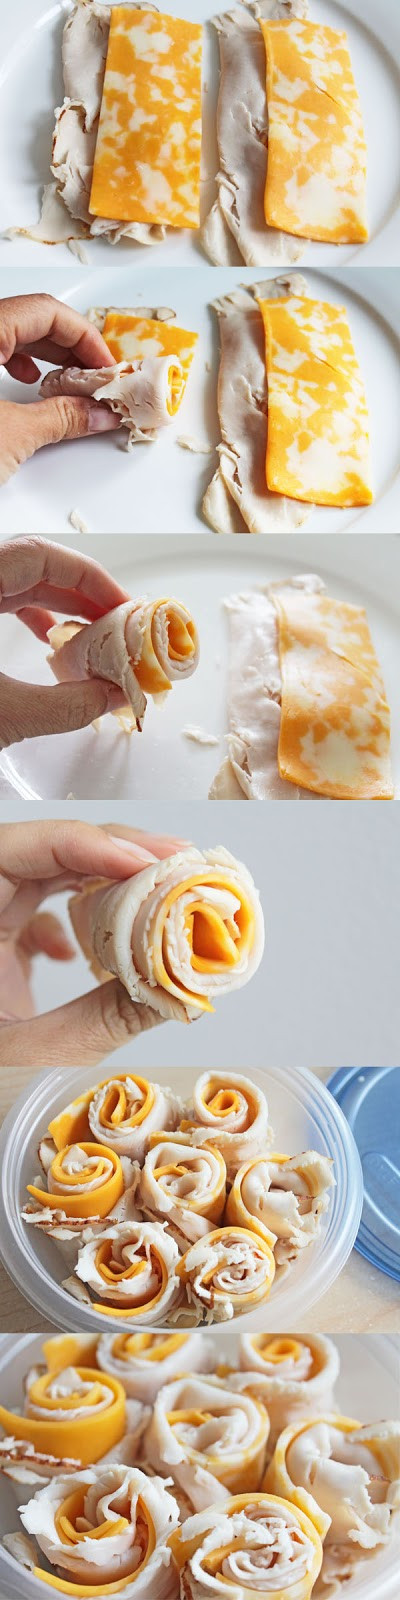 Healthy Snacks For Work
 Easy to Make Snacks Turkey and Cheese Rolls Recipe